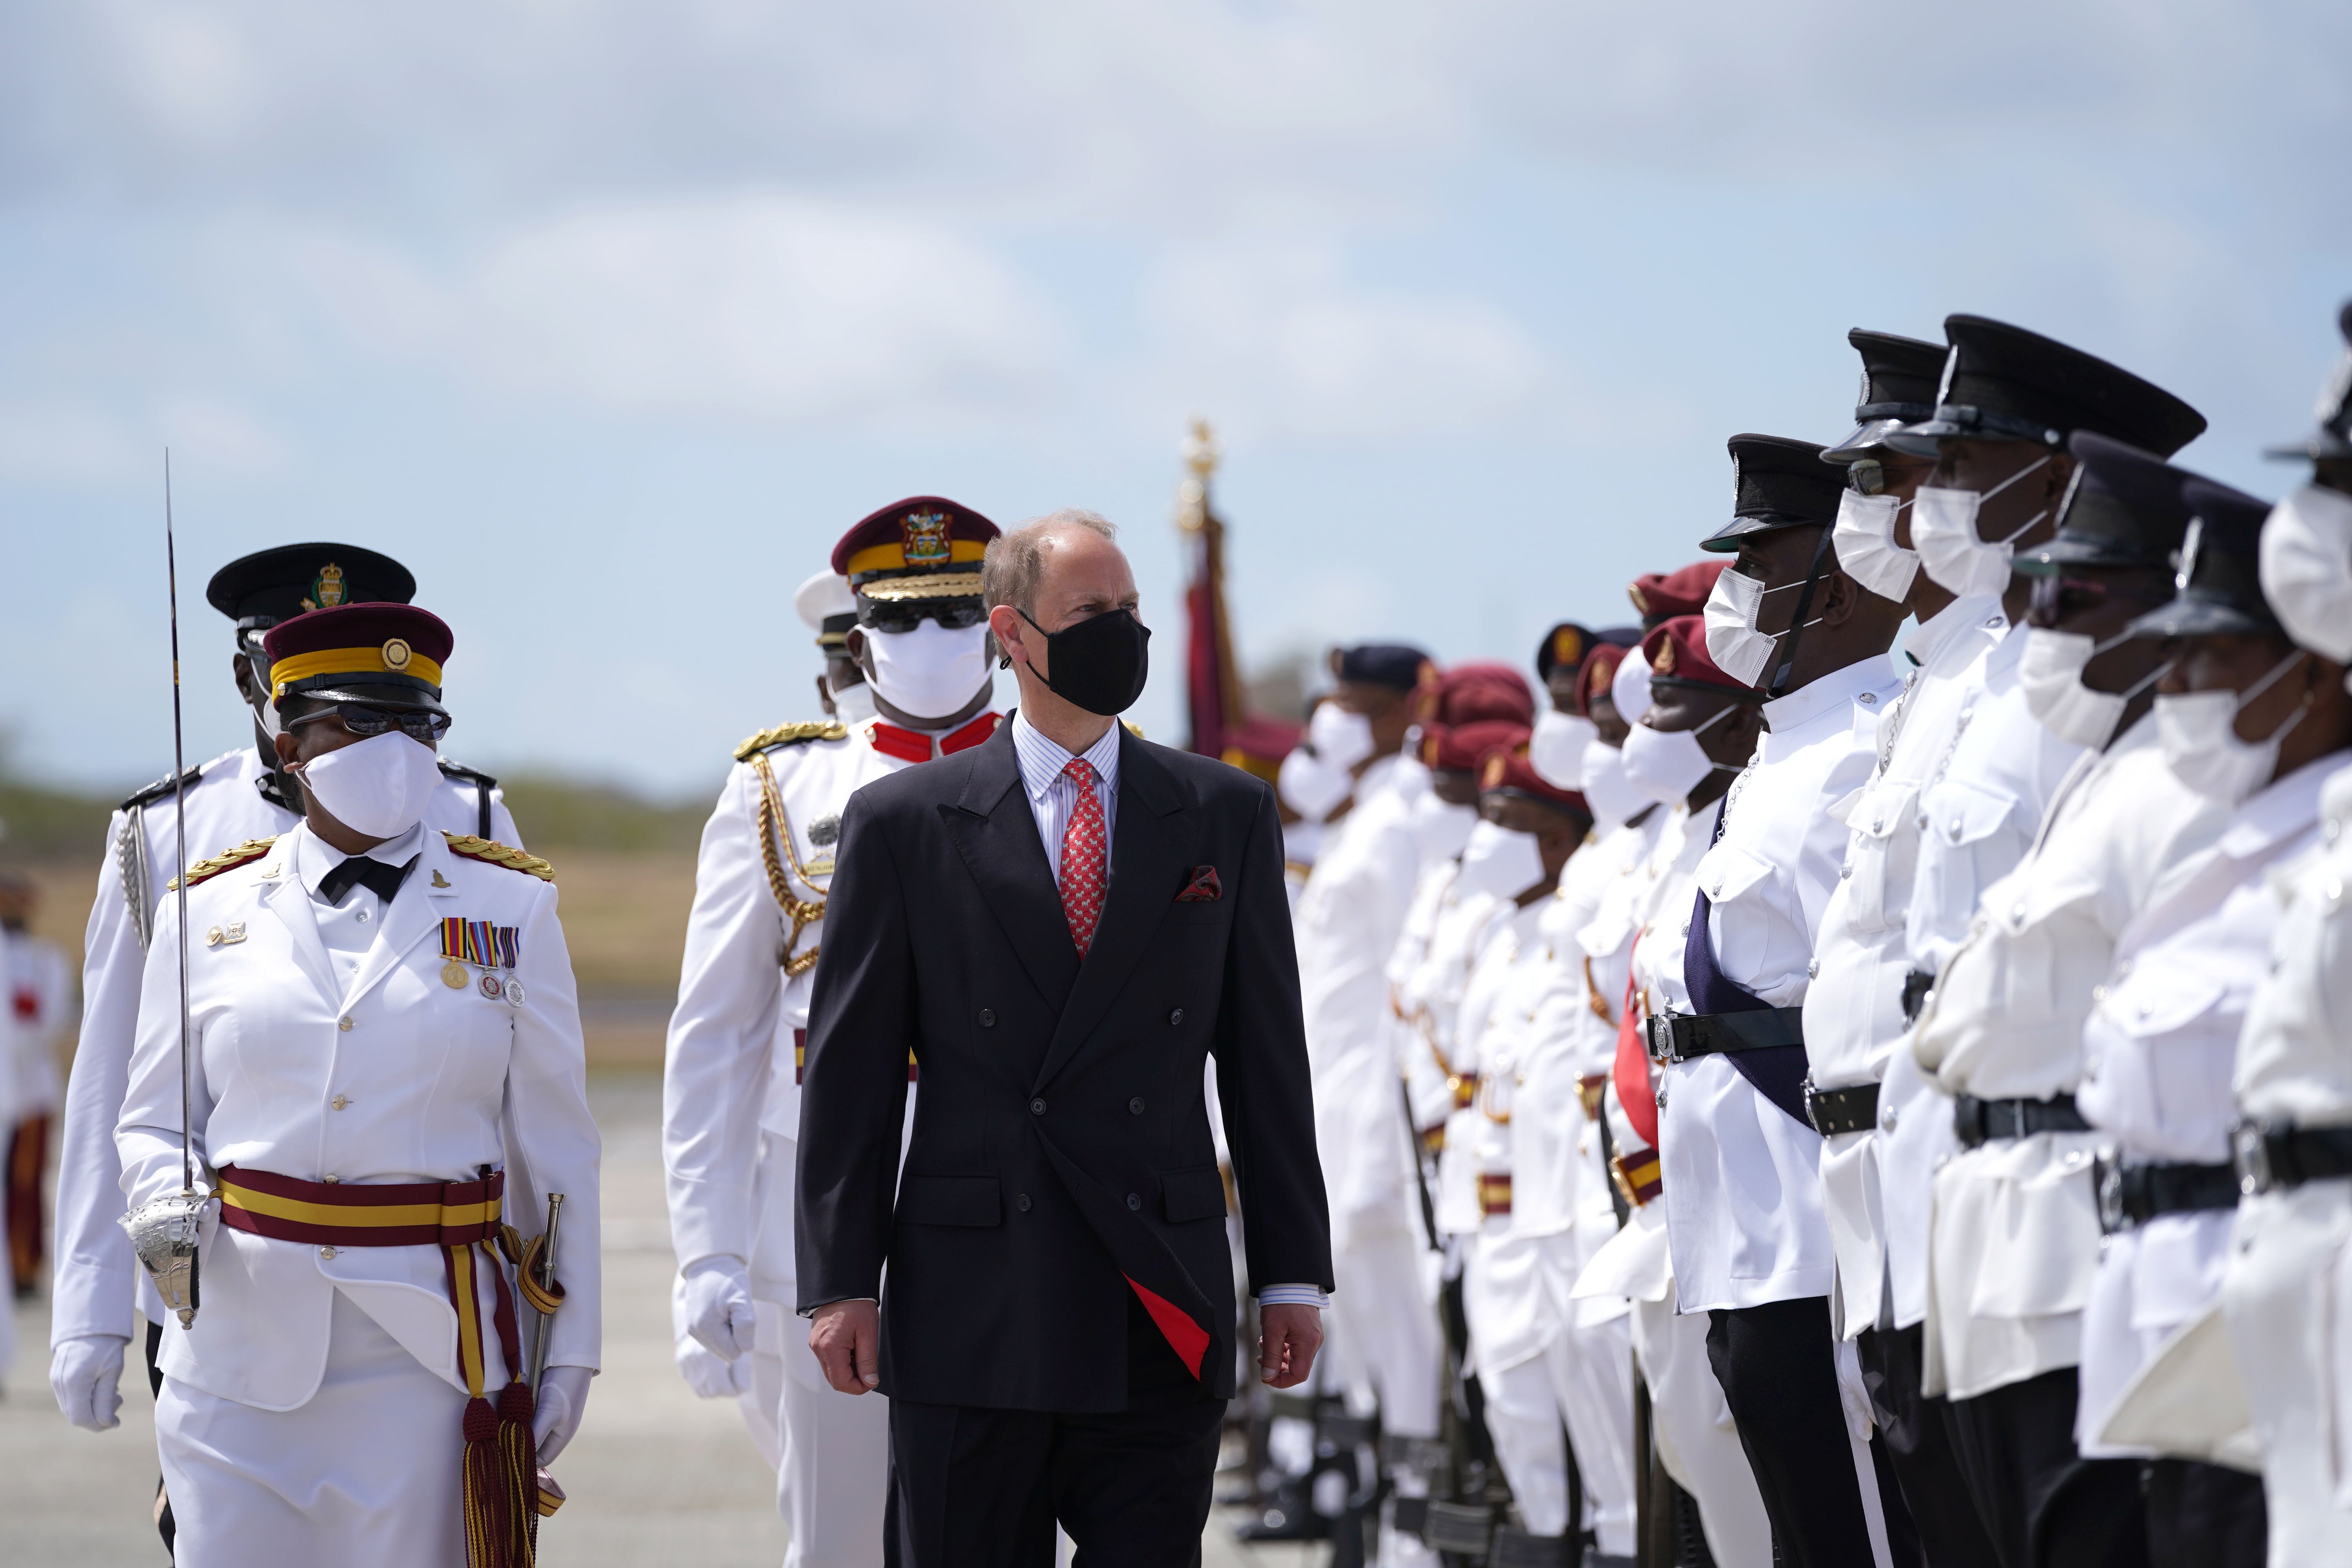 The Earl of Wessex inspects a guard of honour after arriving at VC Bird International Airport (Joe Giddens/PA)